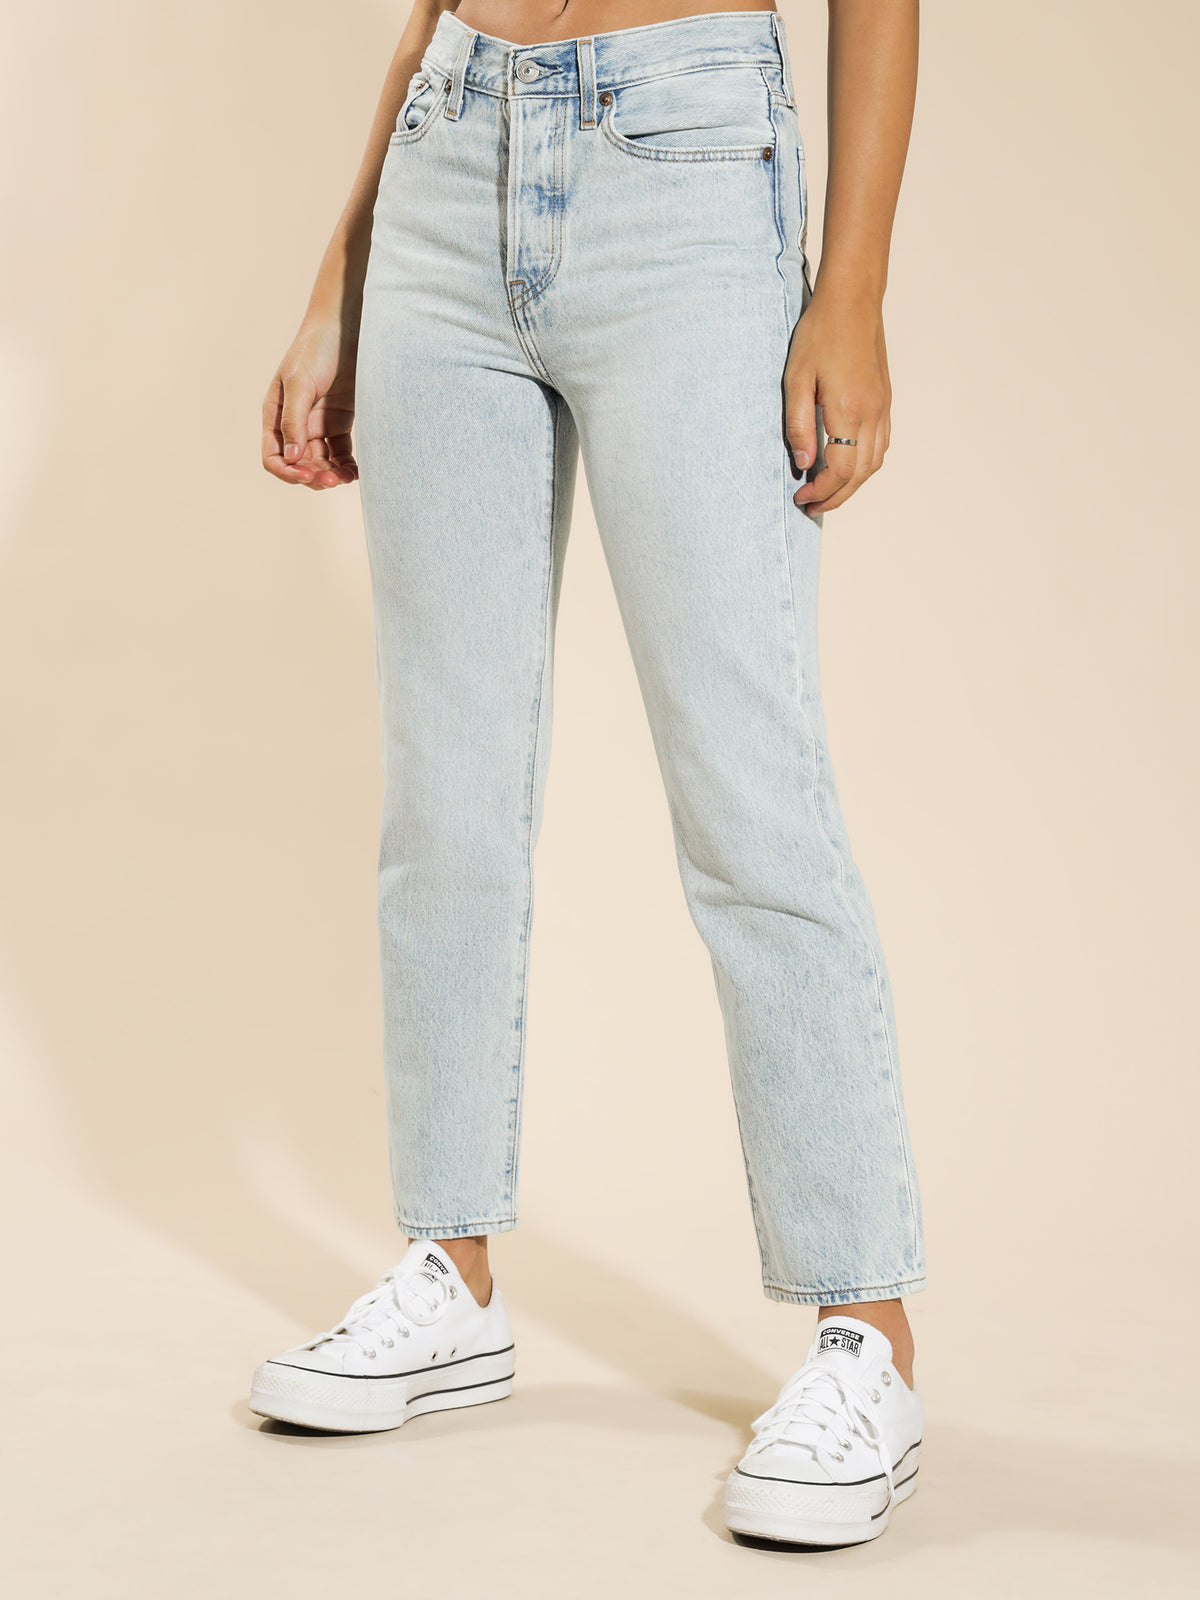 Wedgie Fit Straight Jeans in Montgomery Baked